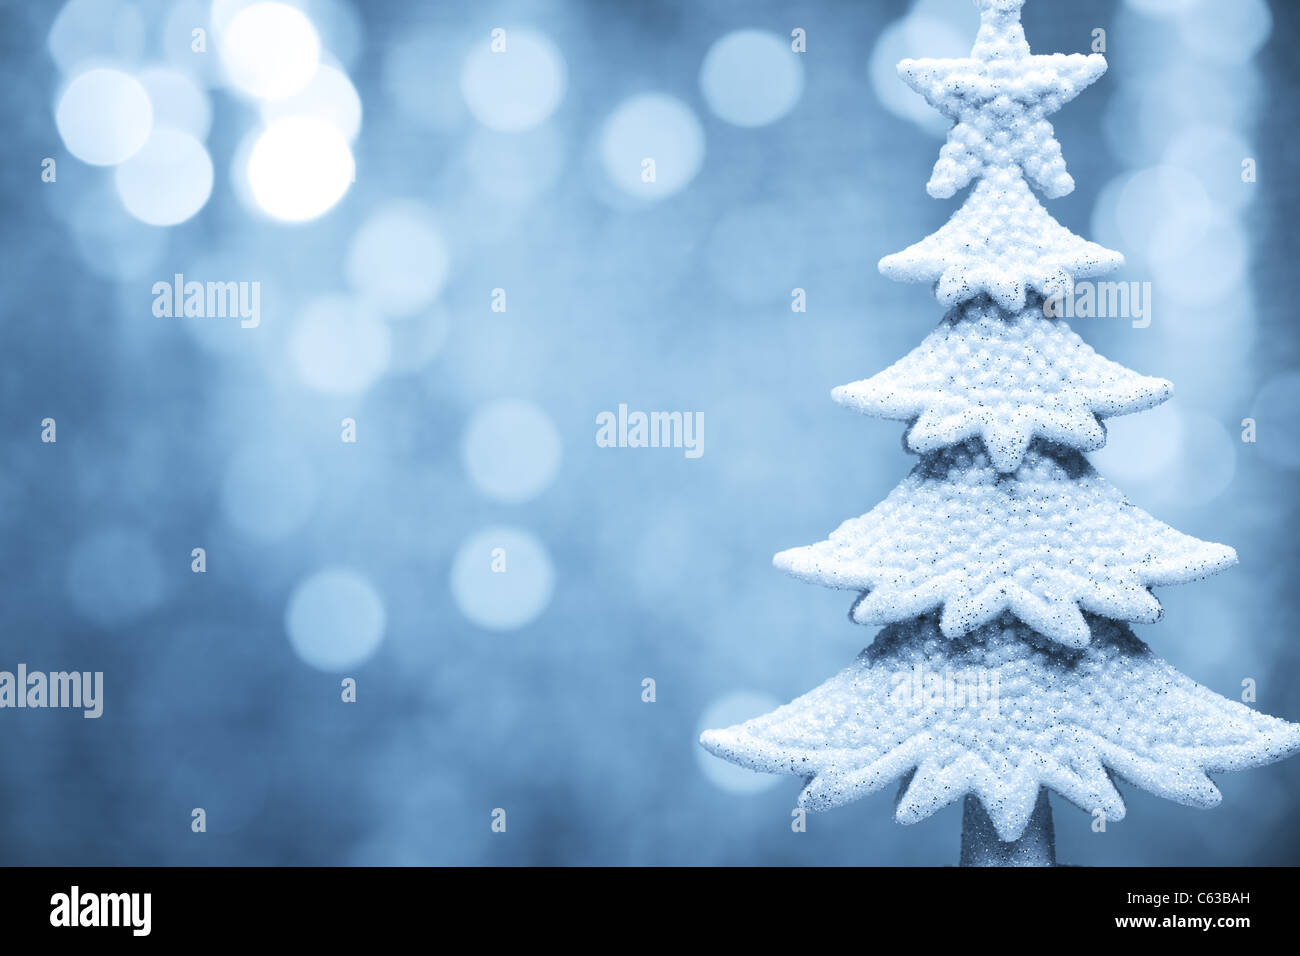 Christmas fir tree model on abstract background.Shallow Dof. Stock Photo